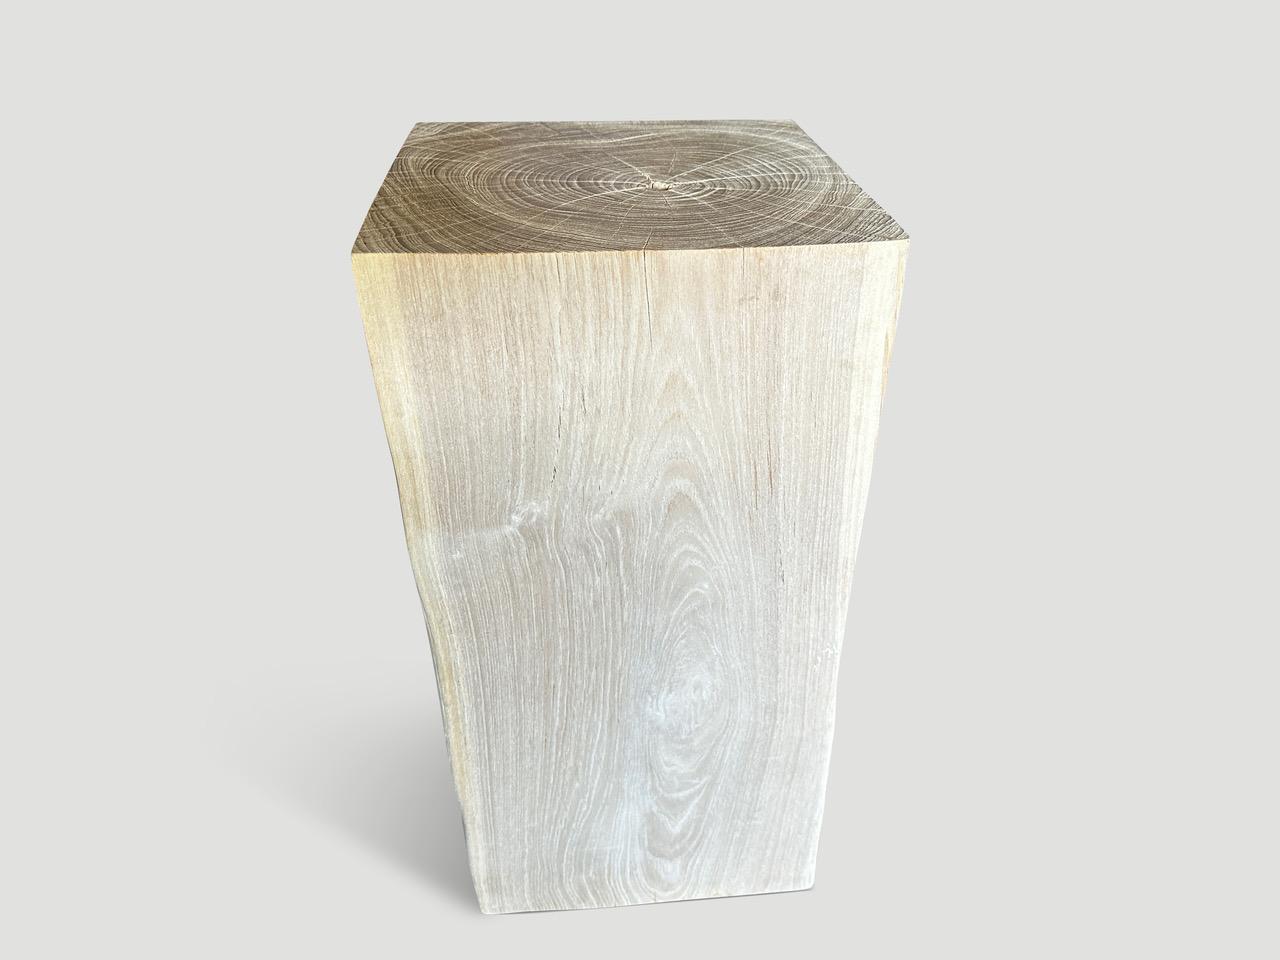 Andrianna Shamaris Minimalist Bleached Teak Wood Side Table or Pedestal In Excellent Condition For Sale In New York, NY